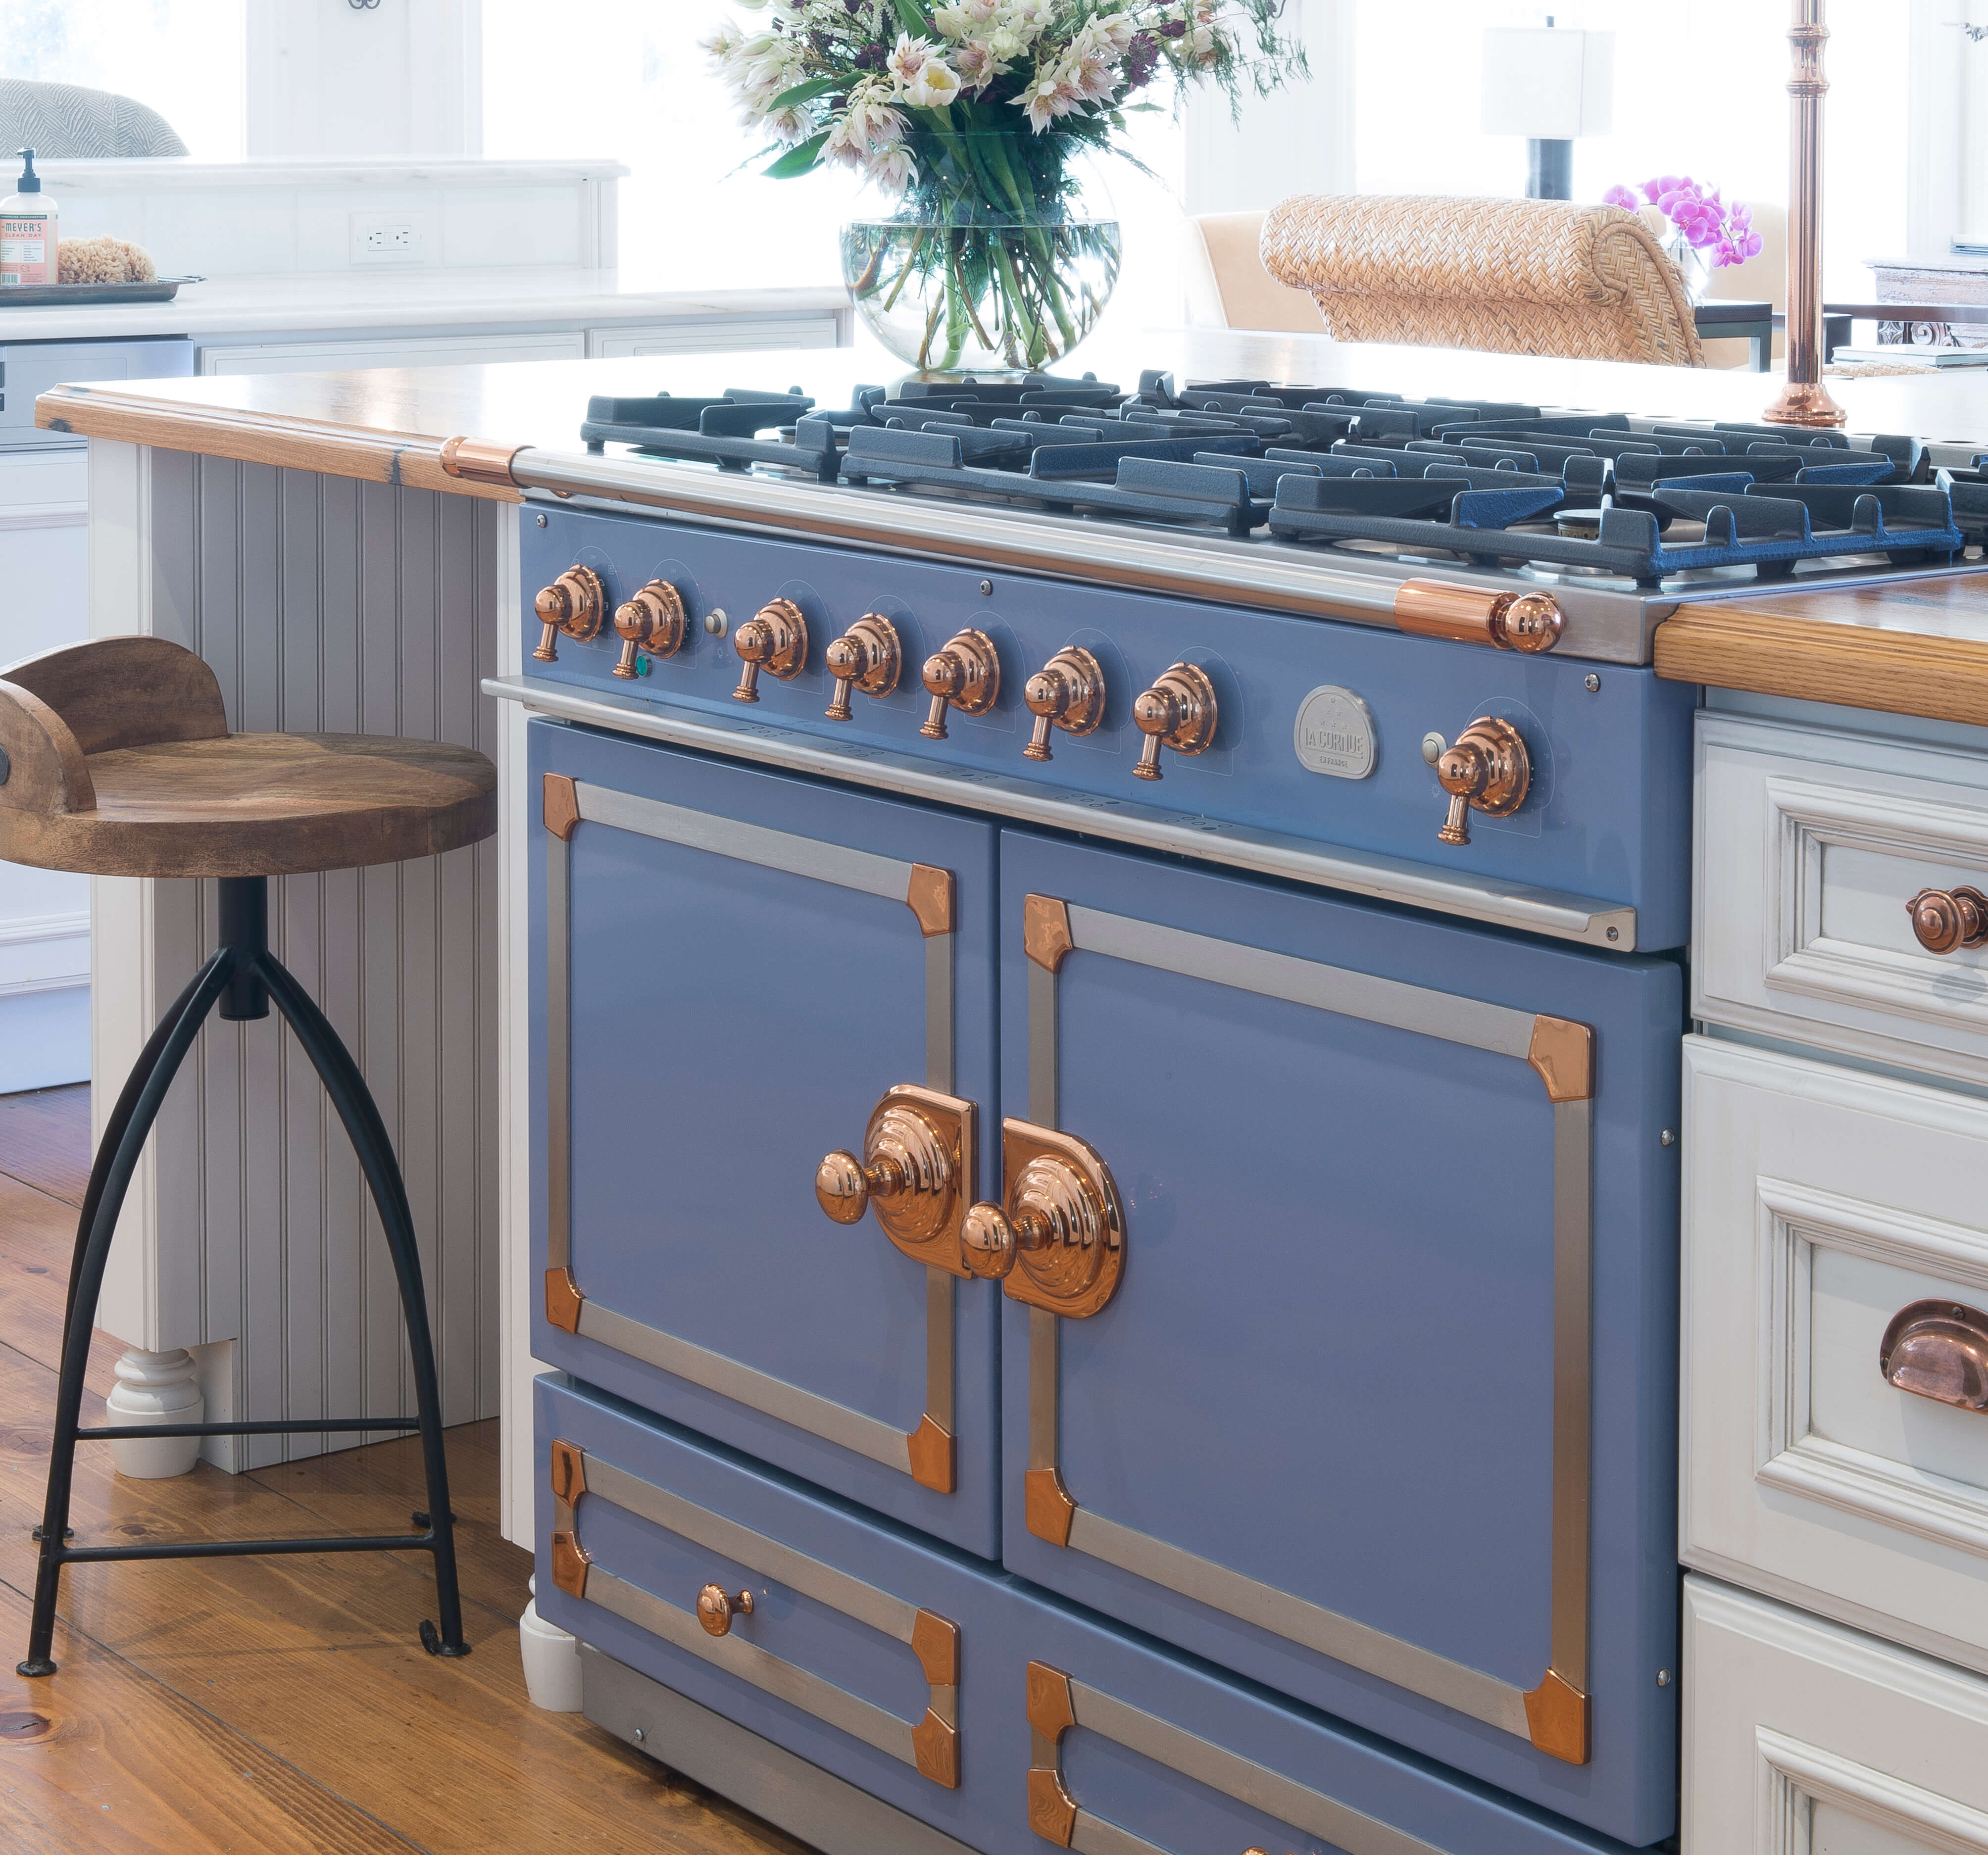 A French style periwinkle oven with traditional styled white painted cabinets from Dura Supreme Cabinetry.